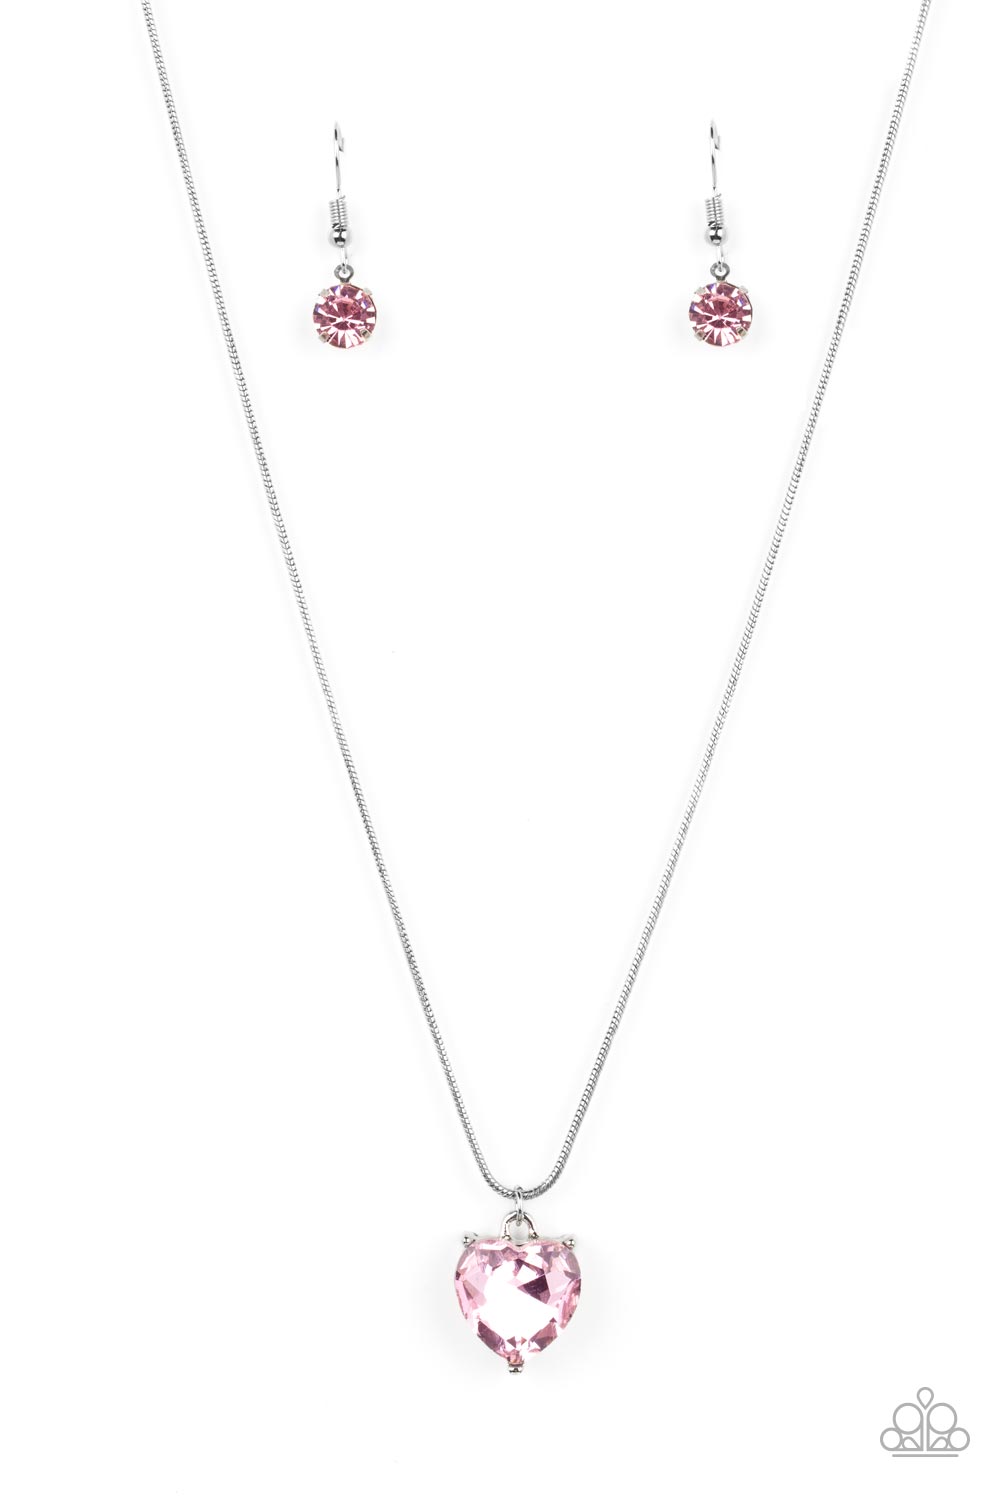 five-dollar-jewelry-smitten-with-style-pink-necklace-paparazzi-accessories